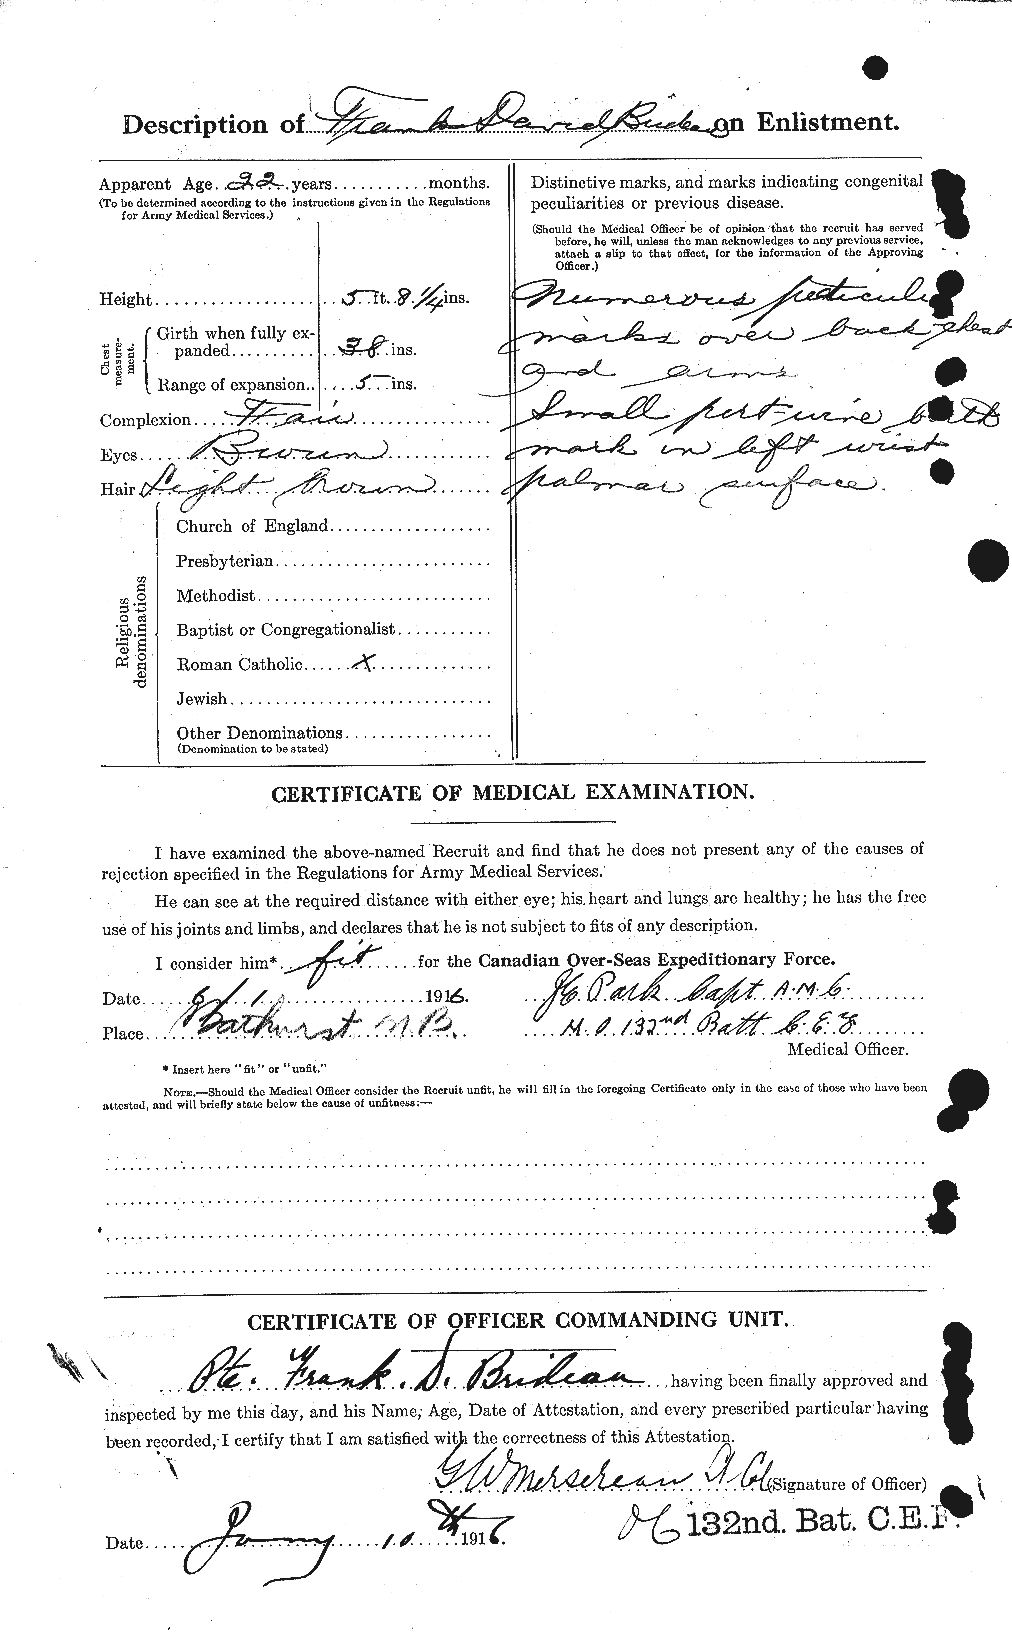 Personnel Records of the First World War - CEF 261258b